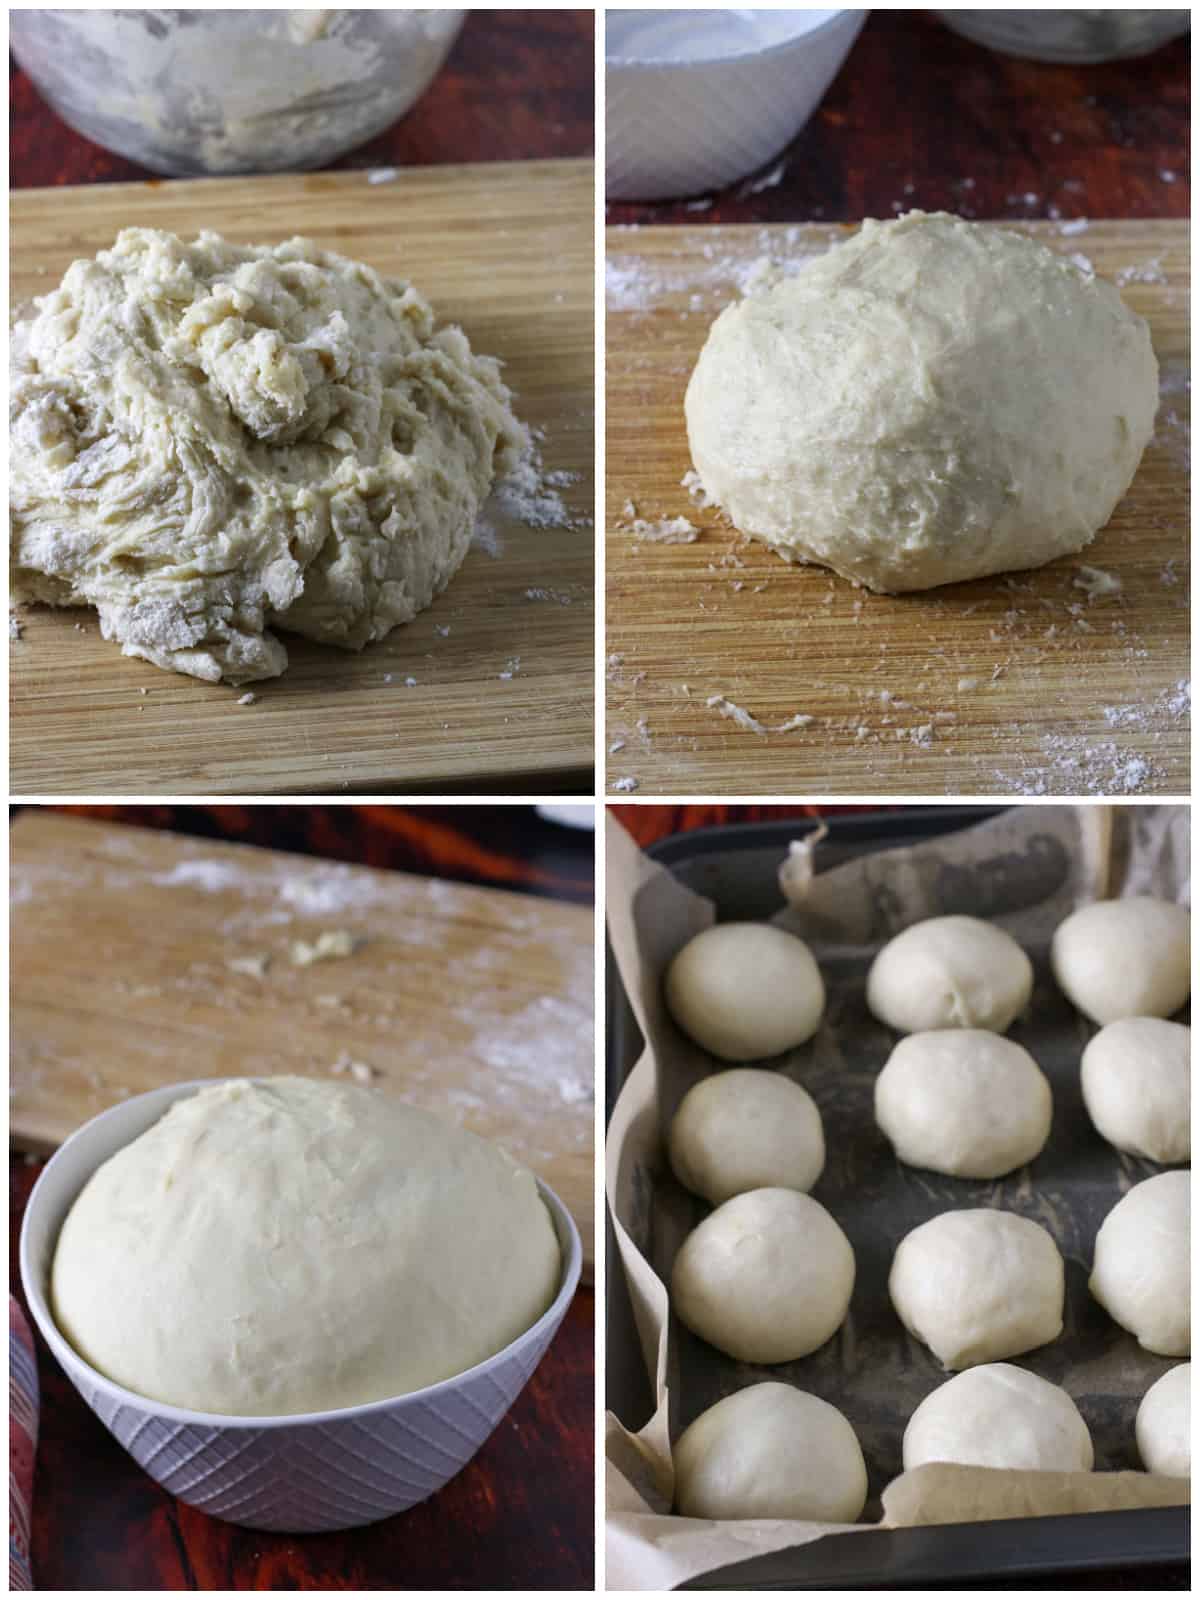 A collage showing the stages of the dough from kneading to shaping into coconut bread rolls.